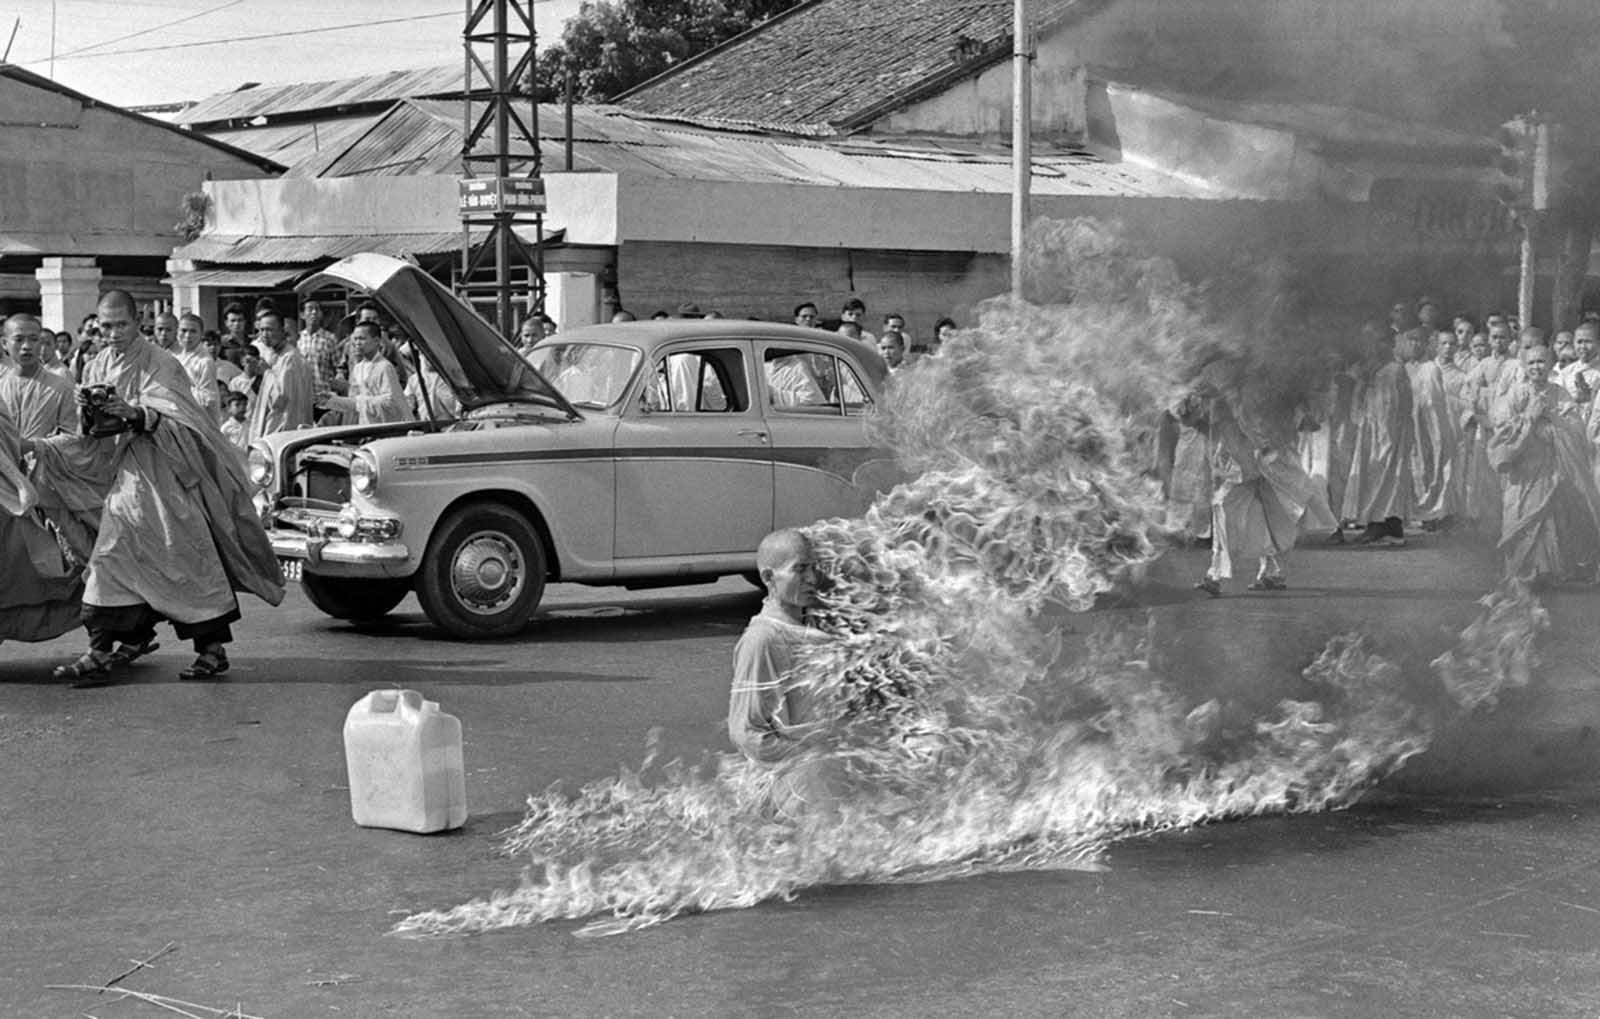 Thich Quang Duc, a Buddhist monk, burns himself to death on a Saigon street on June 11, 1963, to protest alleged persecution of Buddhists by the South Vietnamese government. President Ngo Dình Diem, part of the Catholic minority, had adopted policies that discriminated against Buddhists and gave high favor to Catholics.